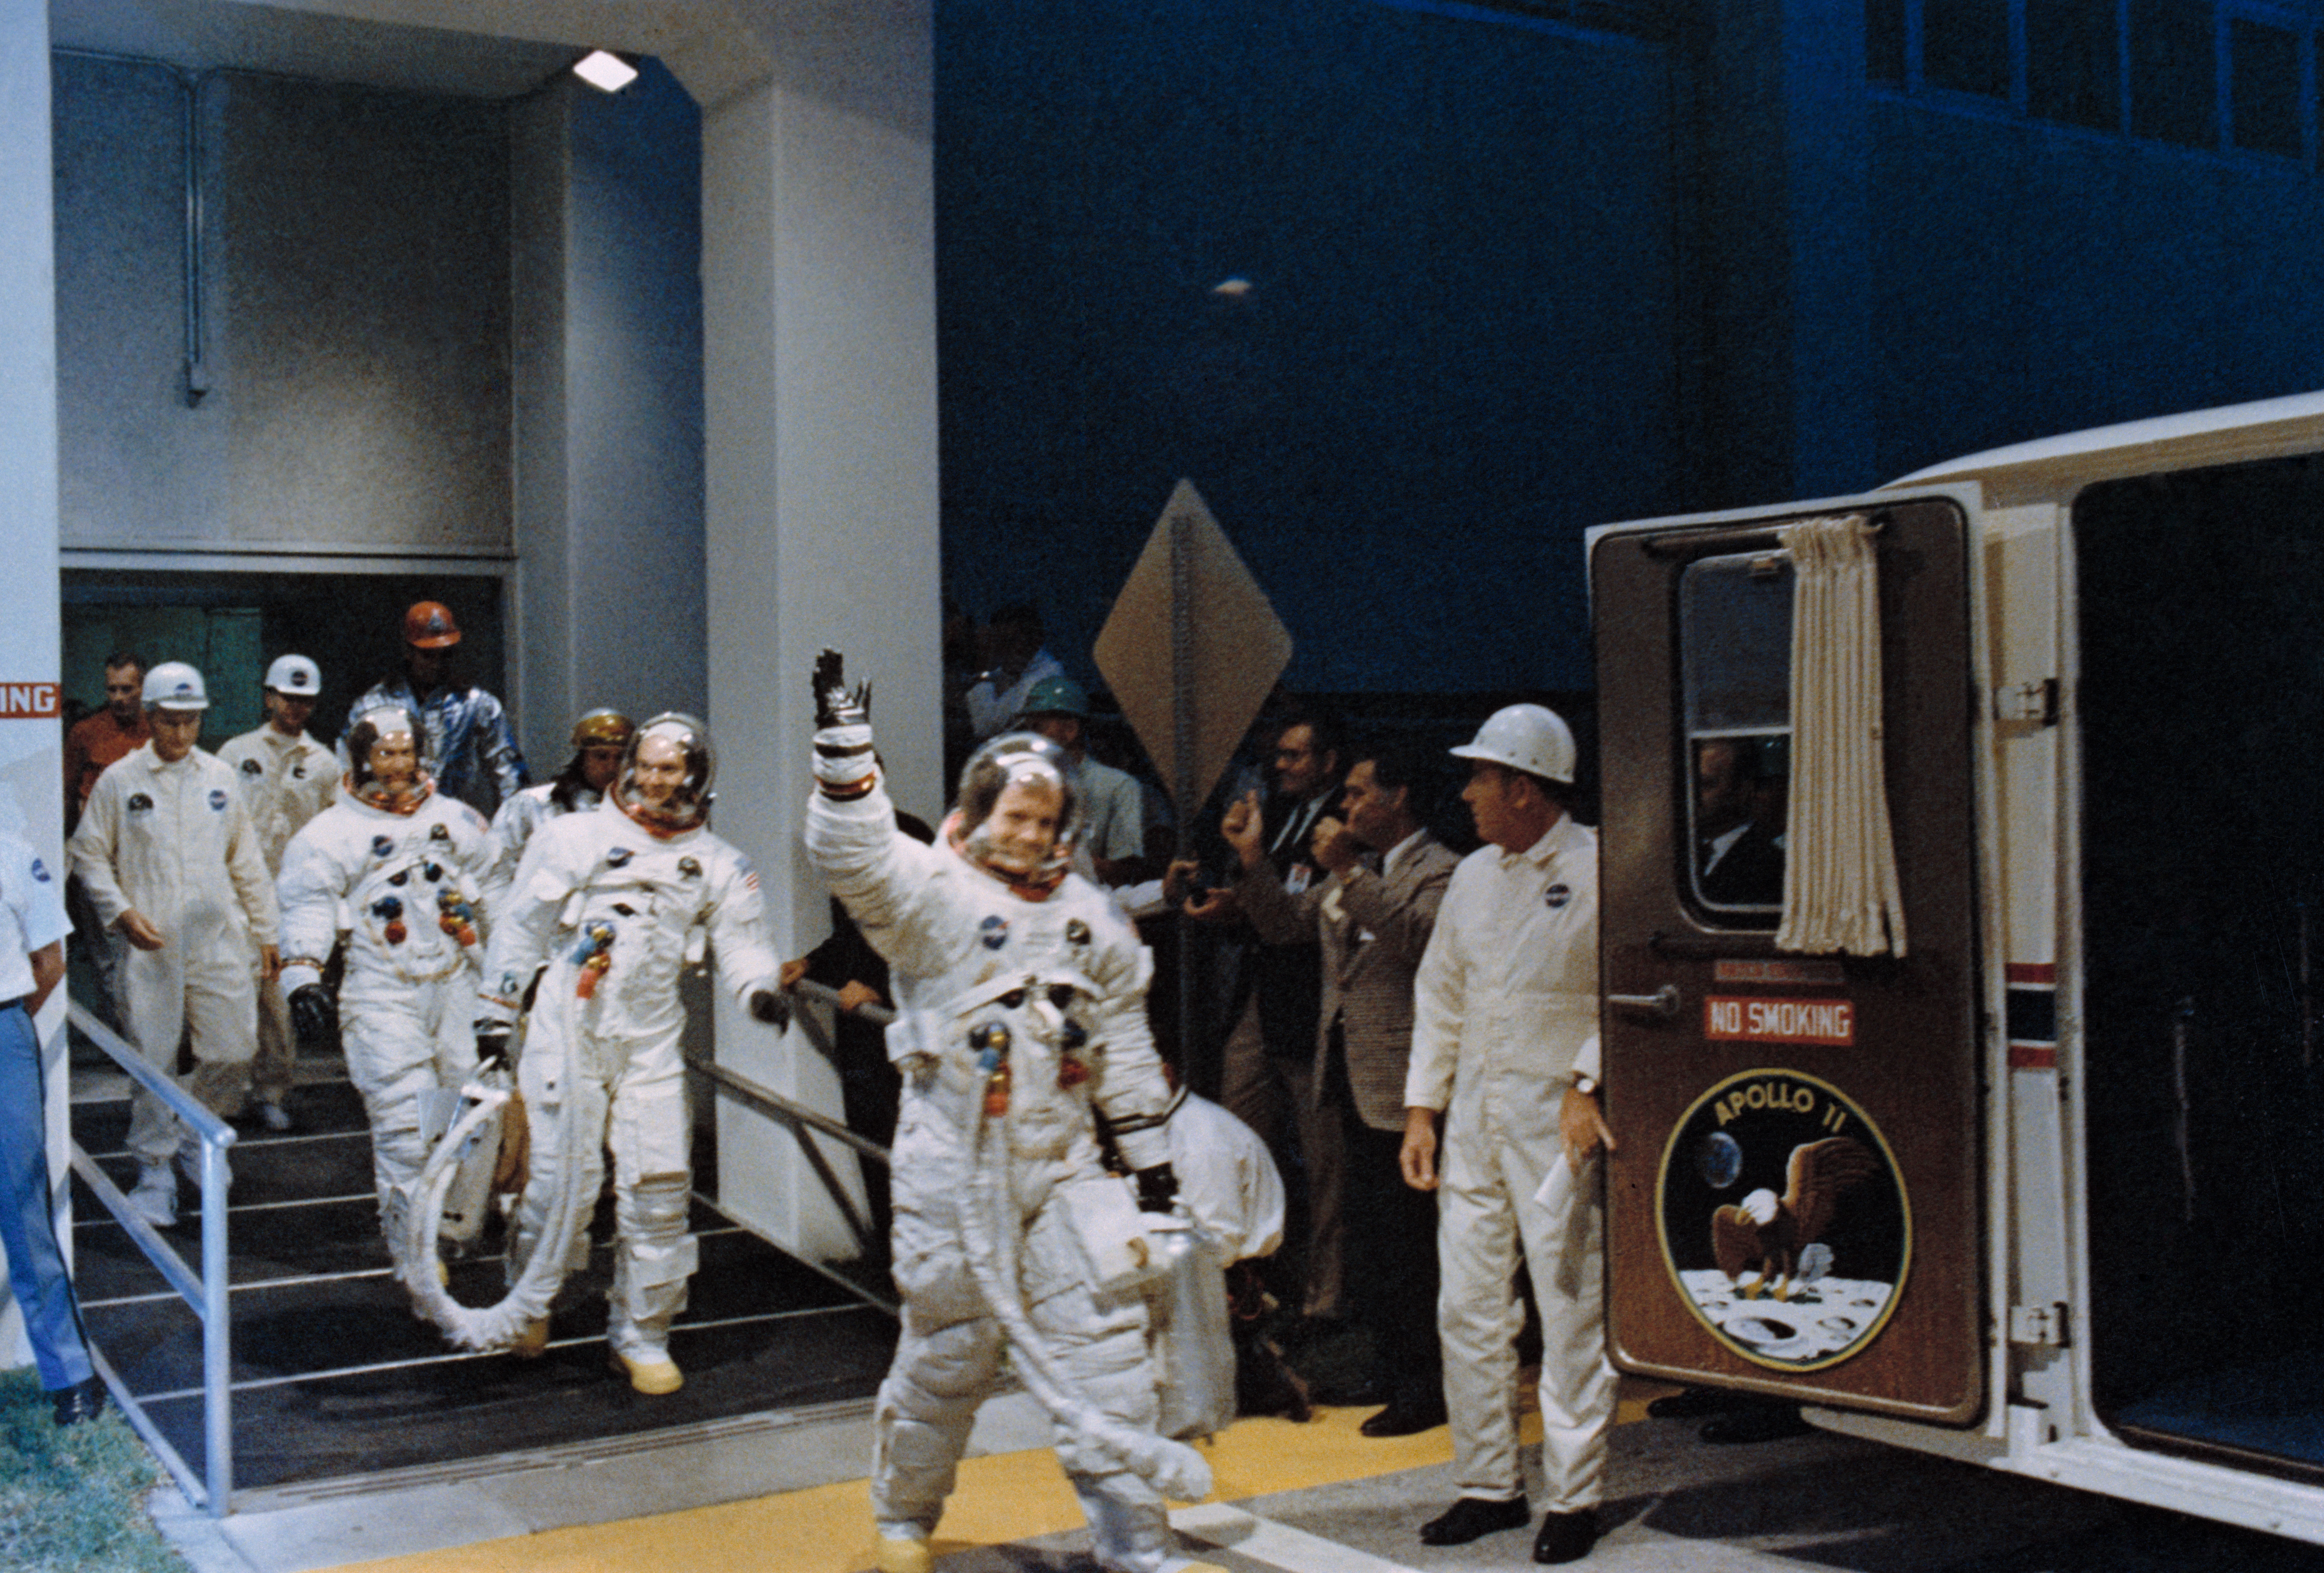 Apollo 11 crew. Wave good-bye to all your friends and supporters before you head for the launch pad